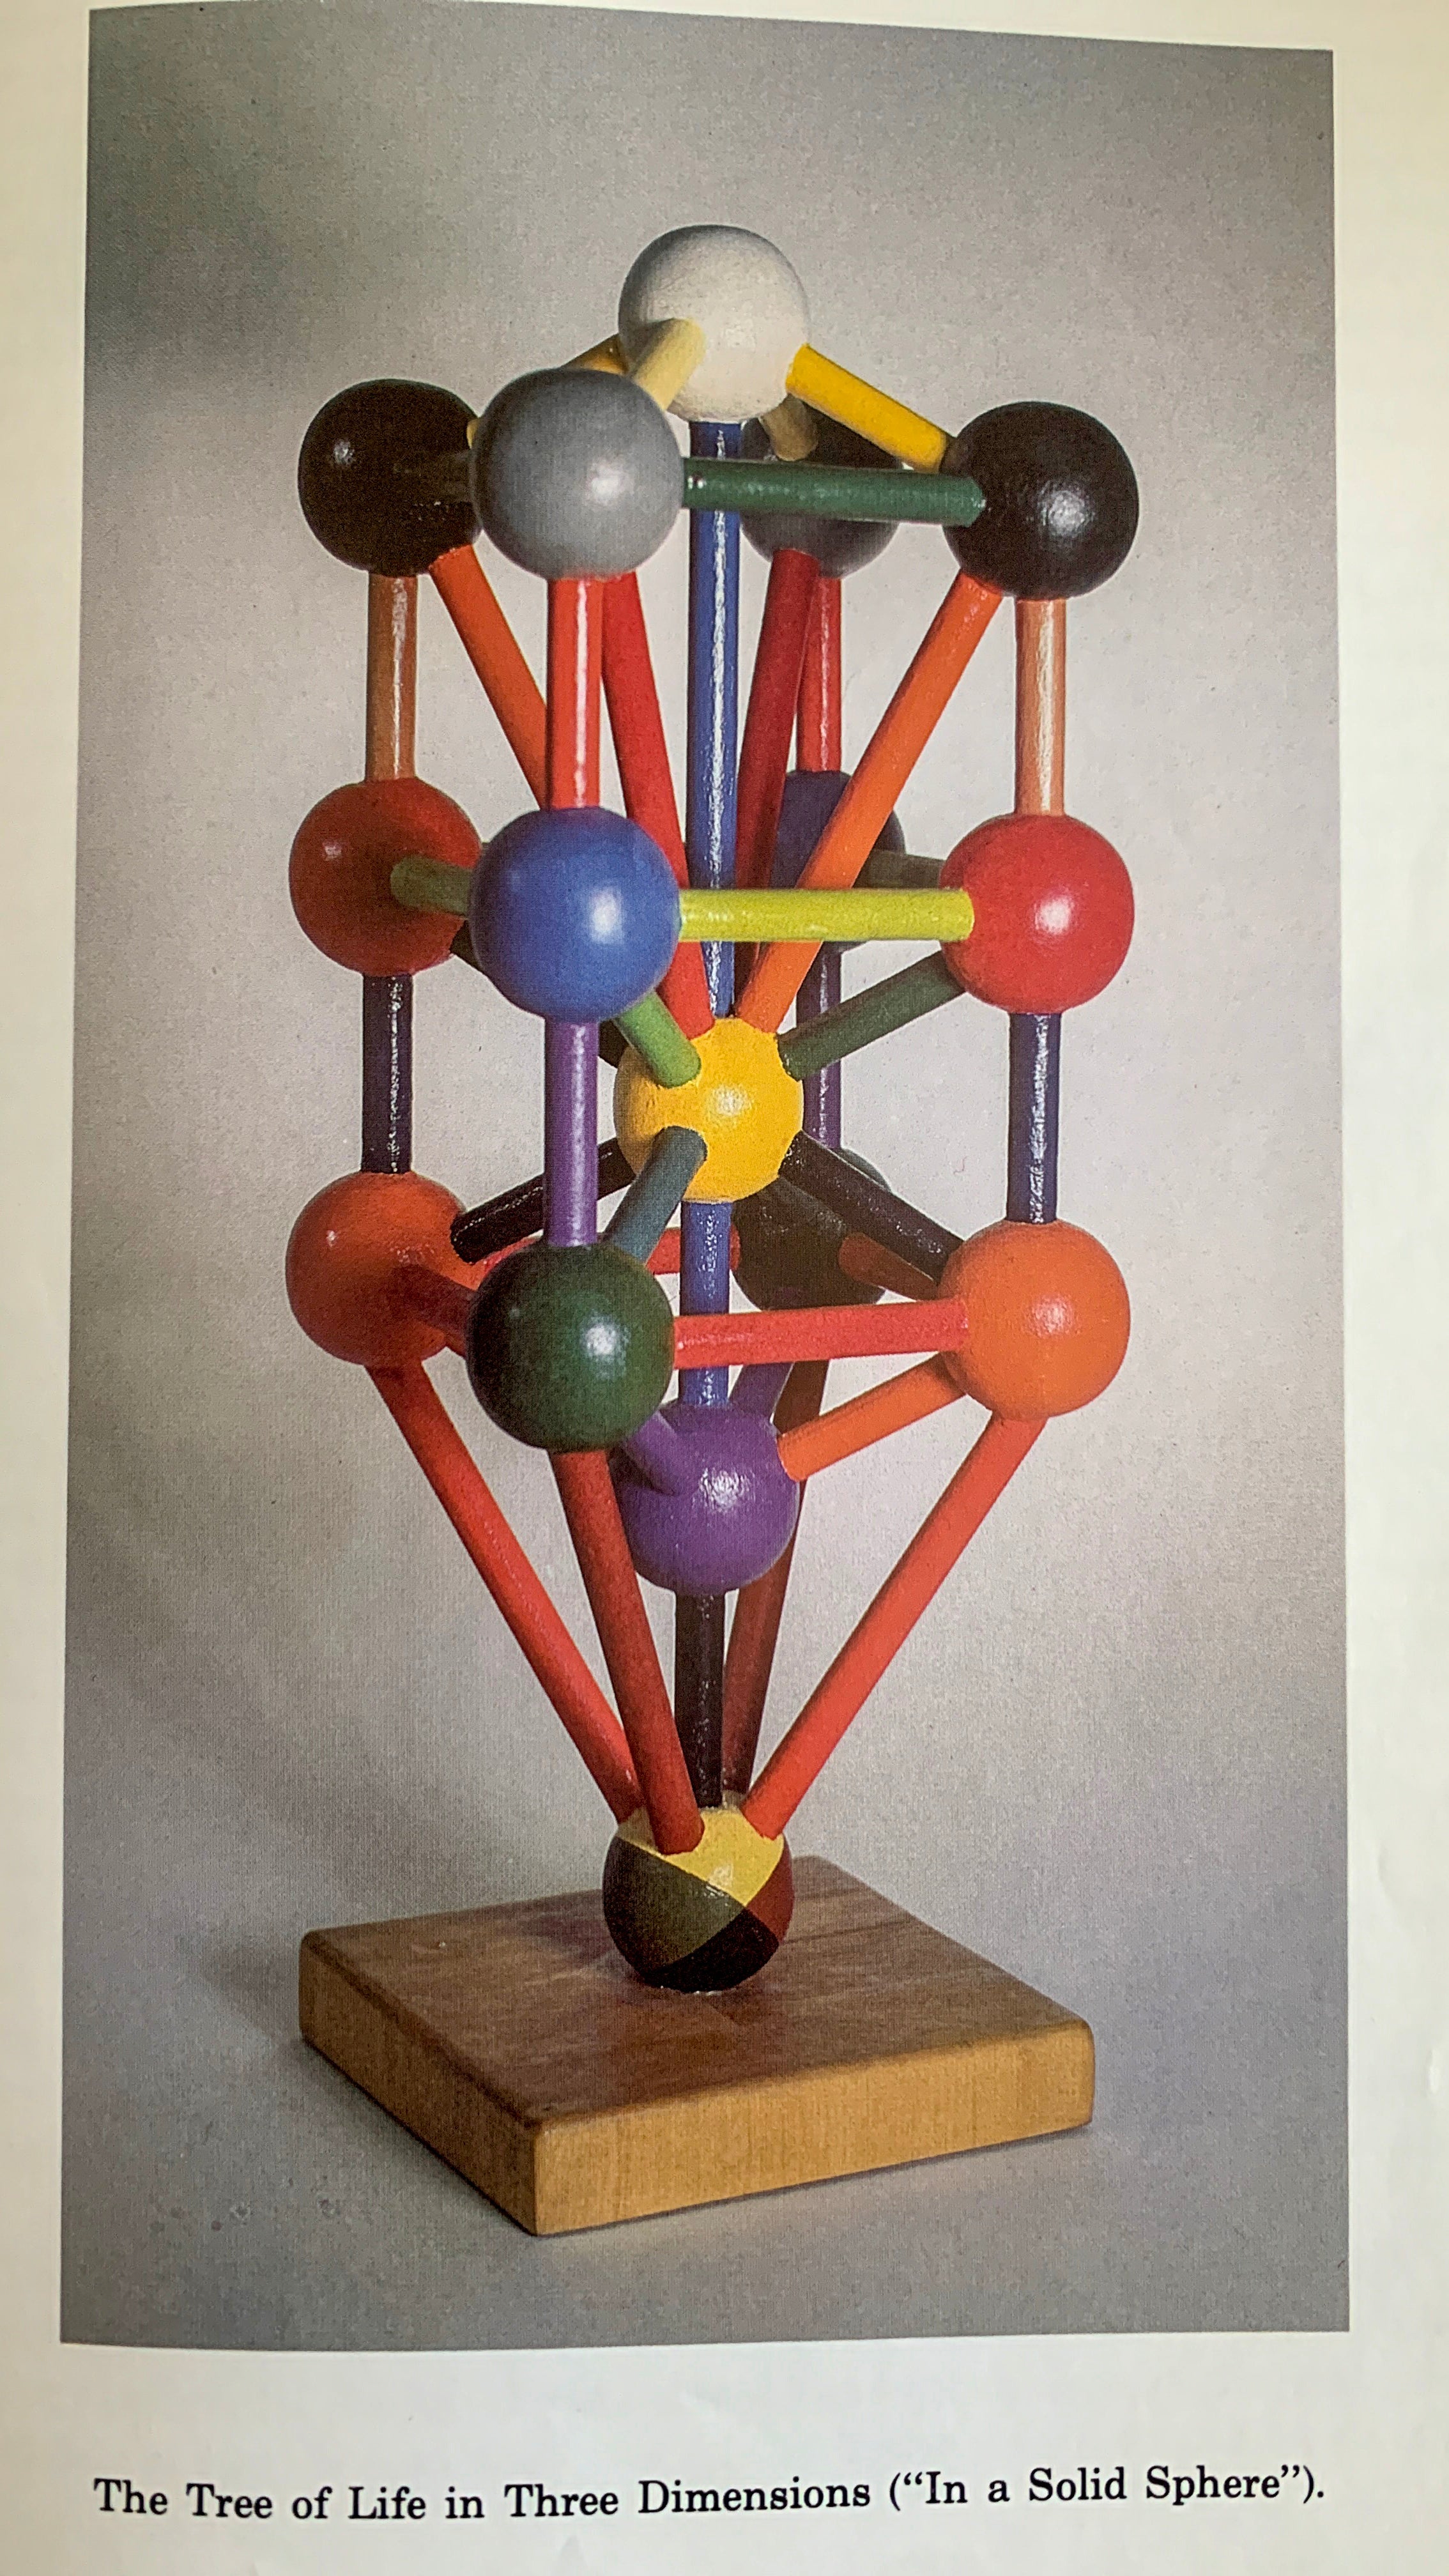 Three Dimensional Model of the Qabalistic Tree of Life created by Robert Wang, from his book The Qabalistic Tarot